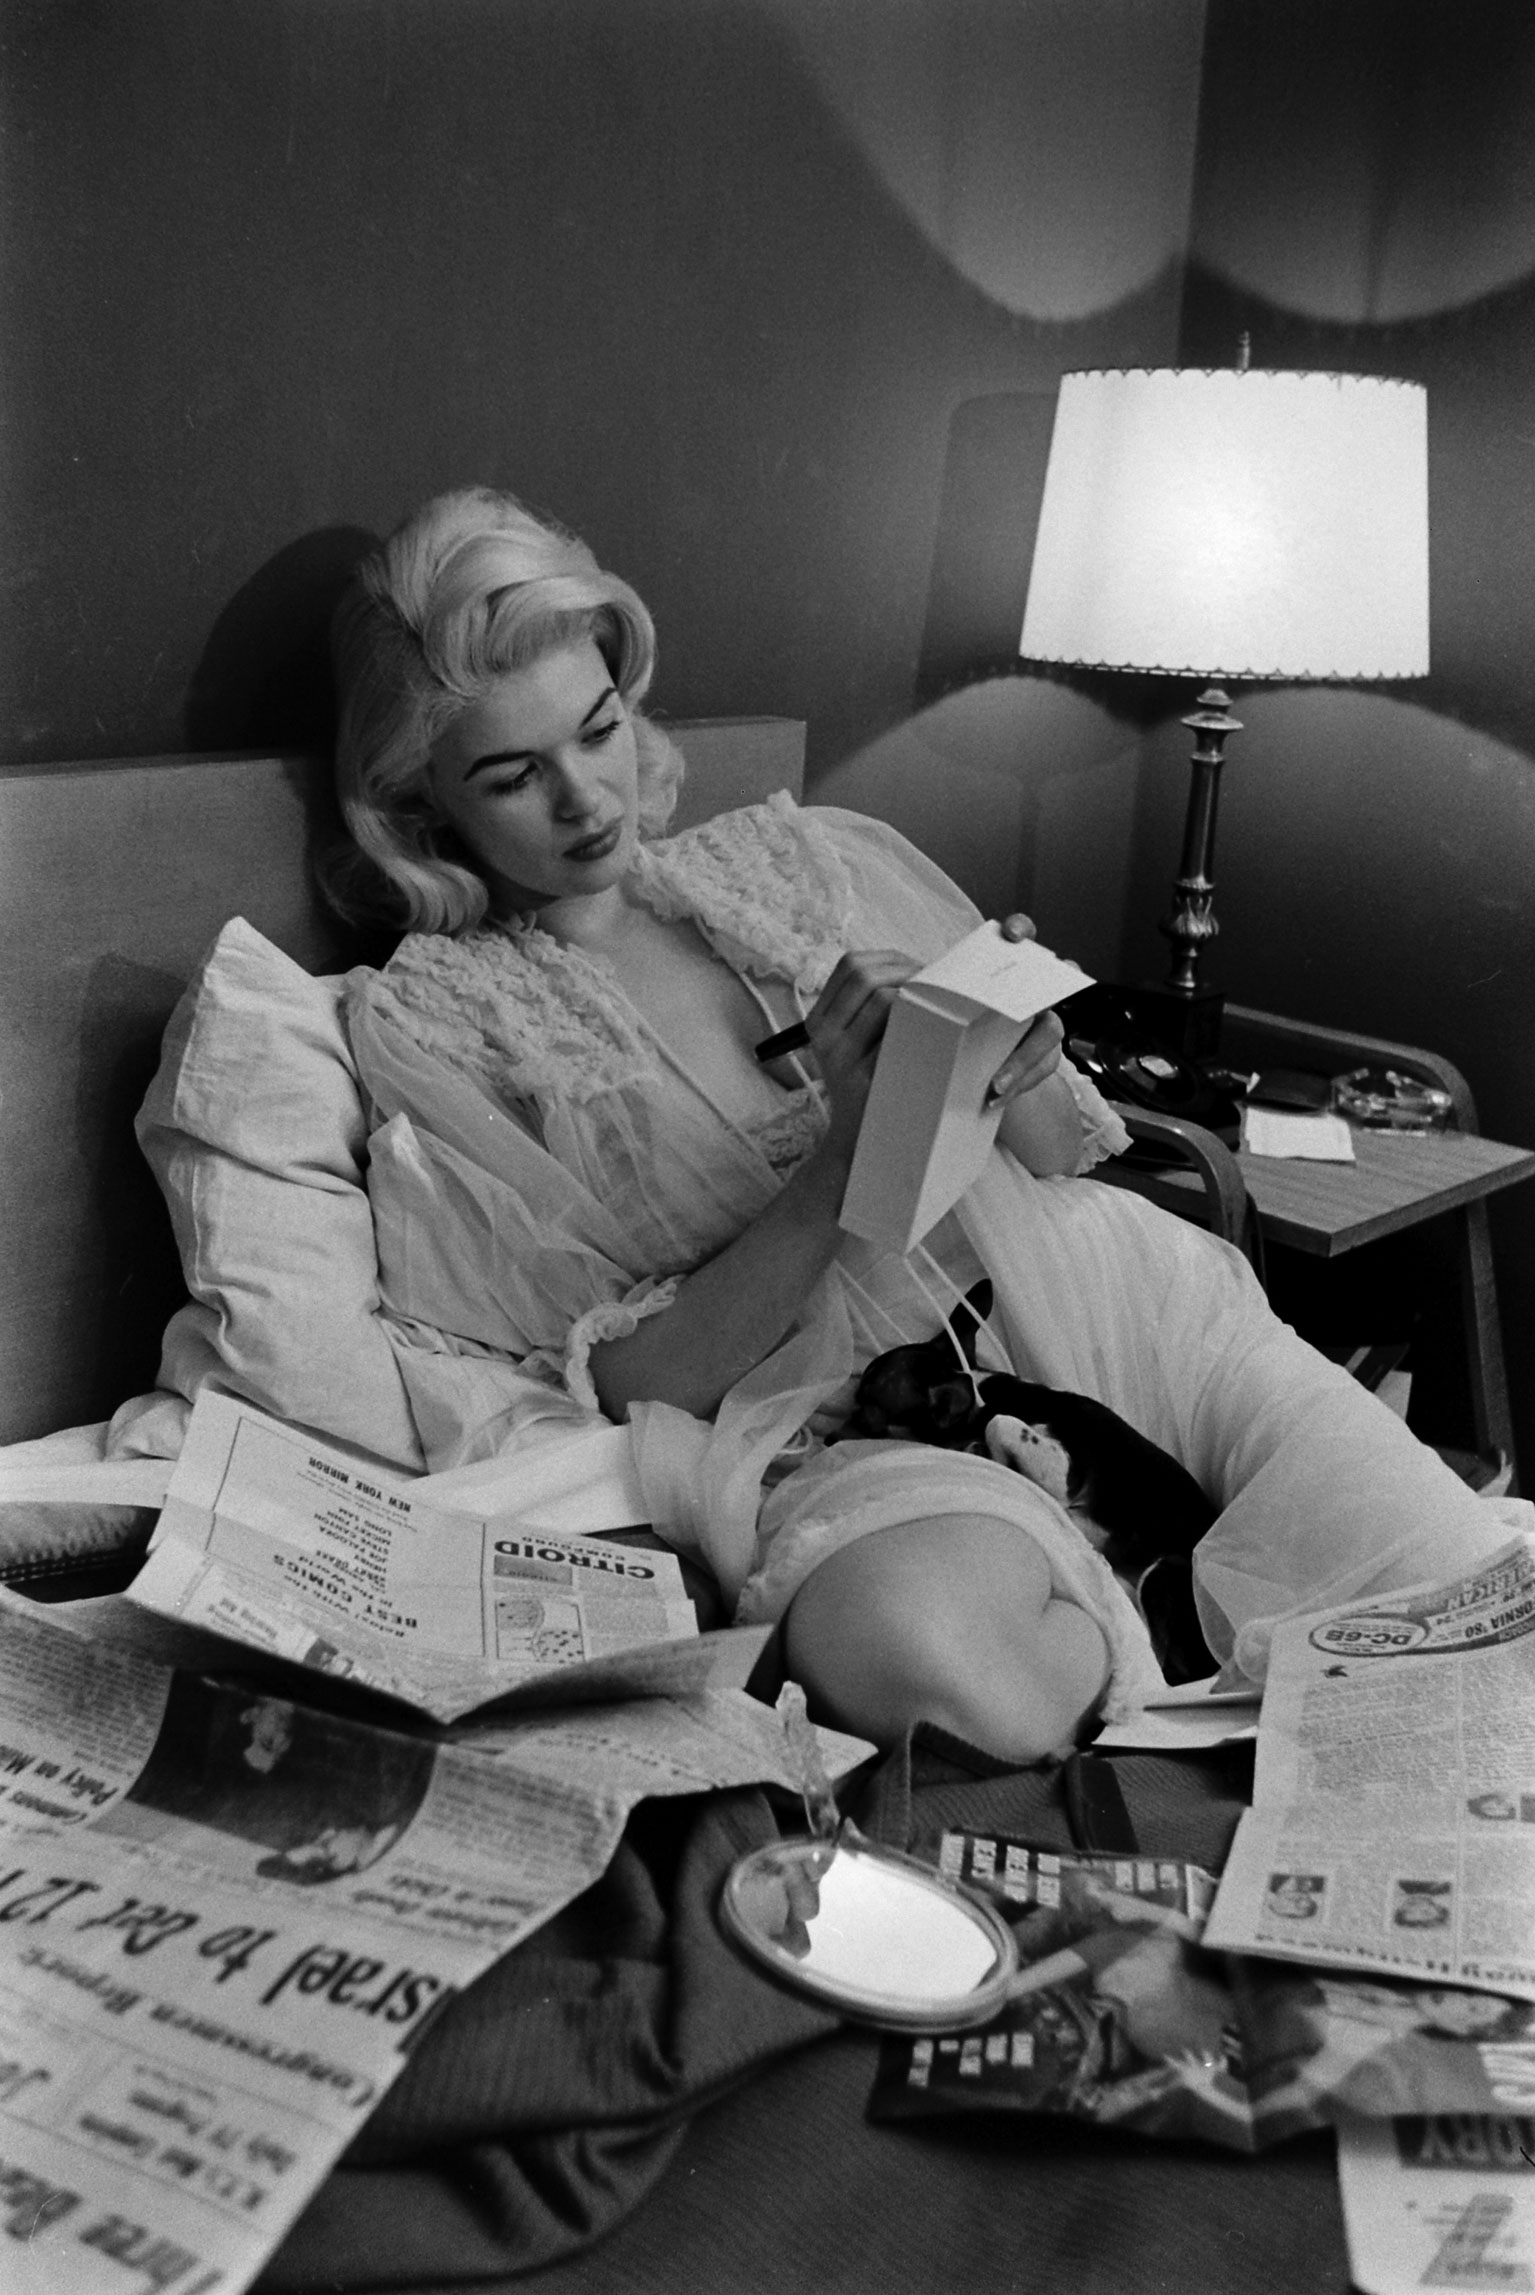 Jayne Mansfield, clad in a revealing negligee, looks over newspapers with her pet Chihuahua in her lap, Hollywood, 1956.